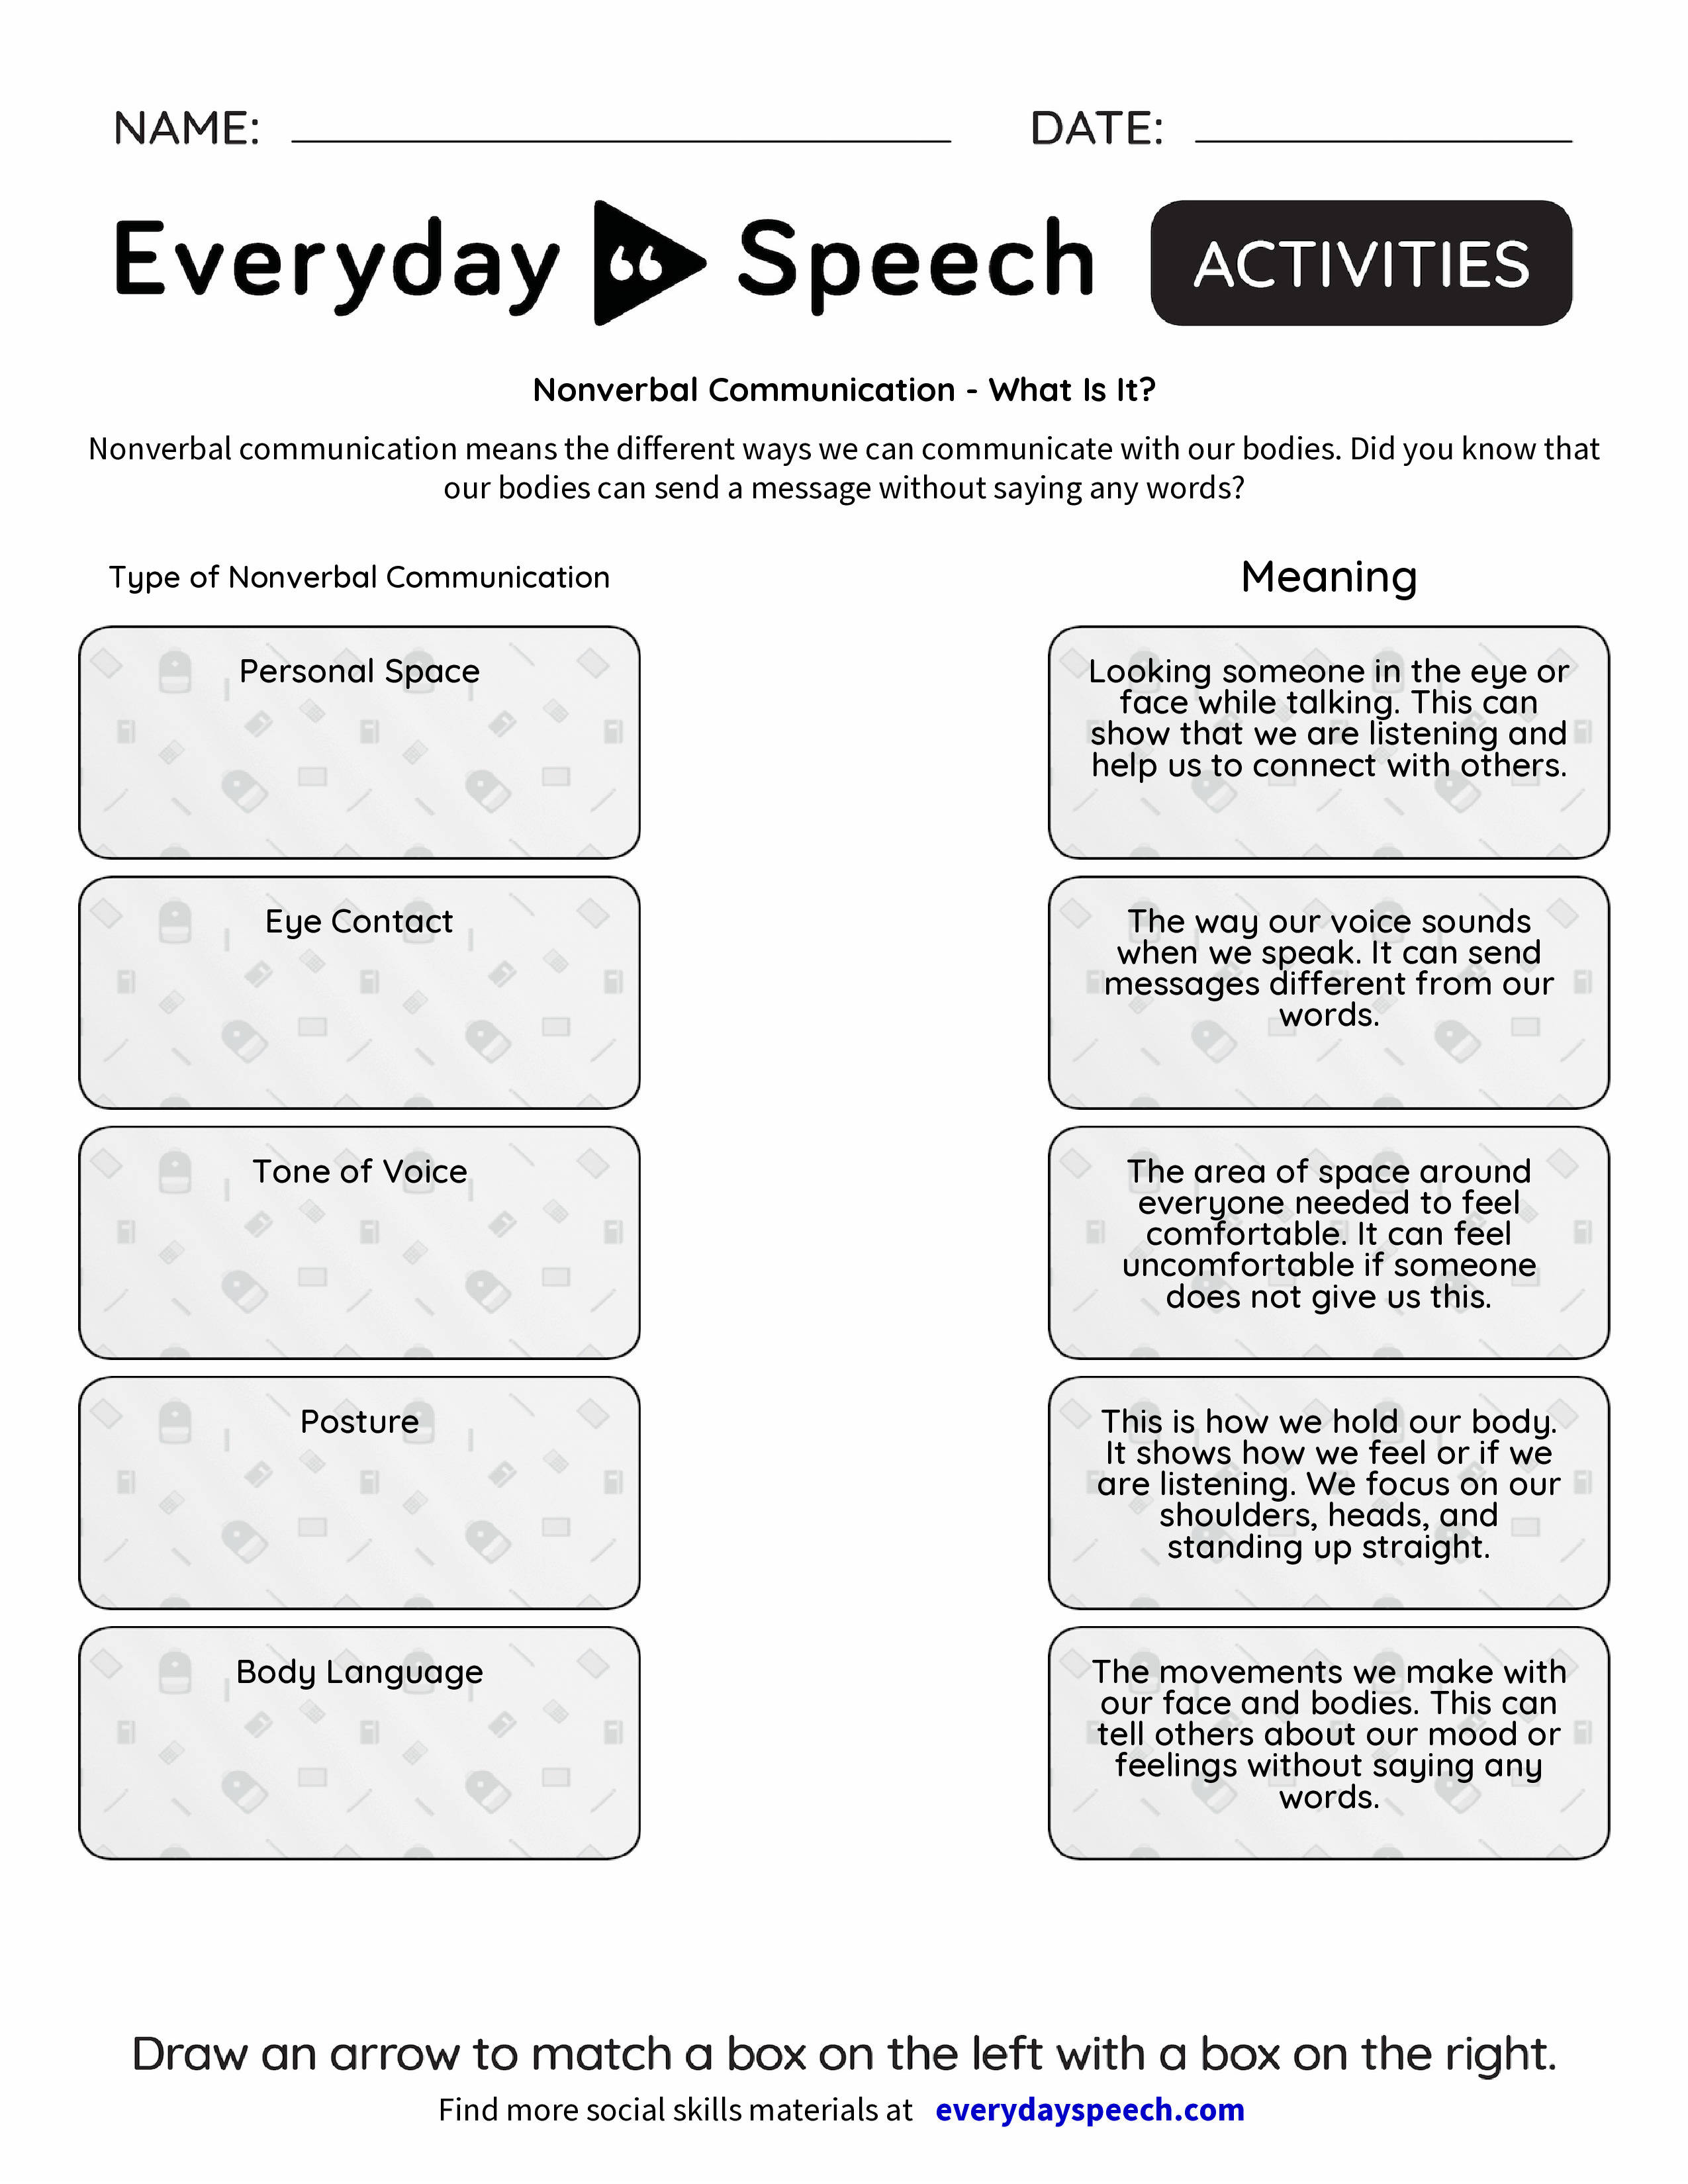 nonverbal-communication-what-is-it-everyday-speech-everyday-speech